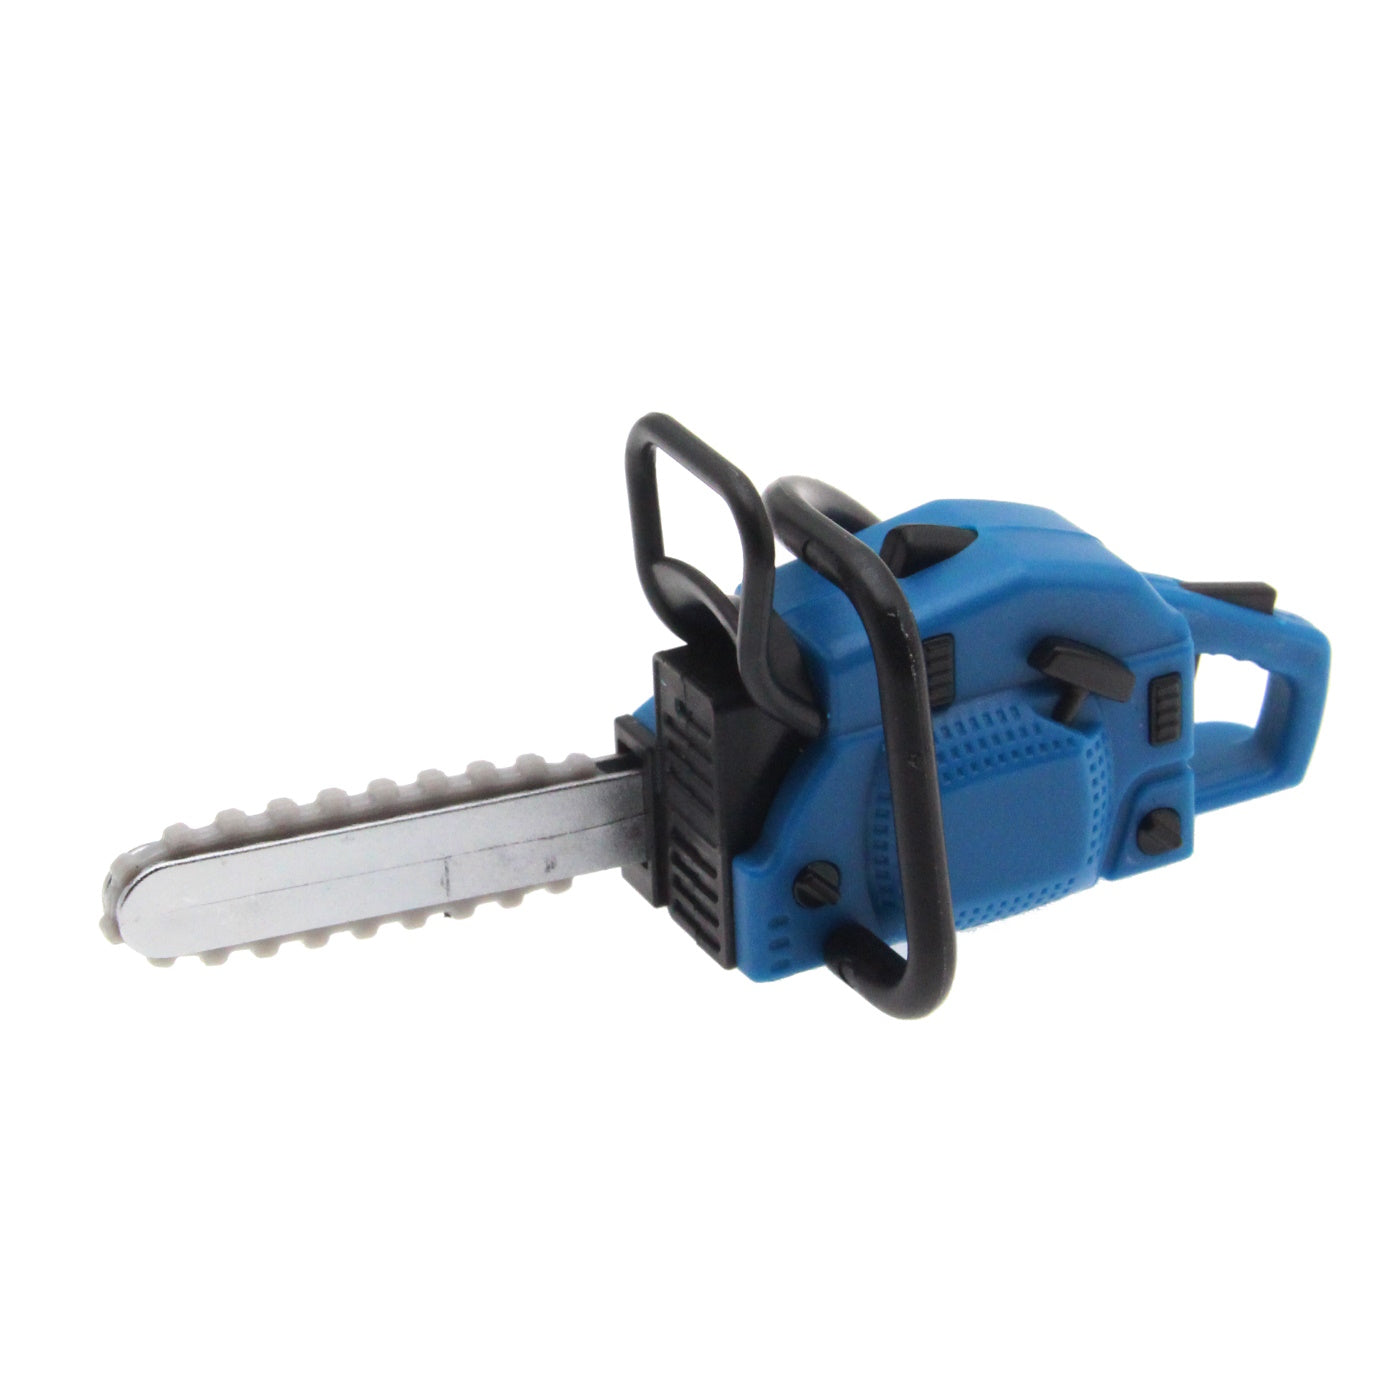 Powerhobby Scale Garage Series 1/10 Chainsaw Blue FOR 1/10 Crawler Accessories.